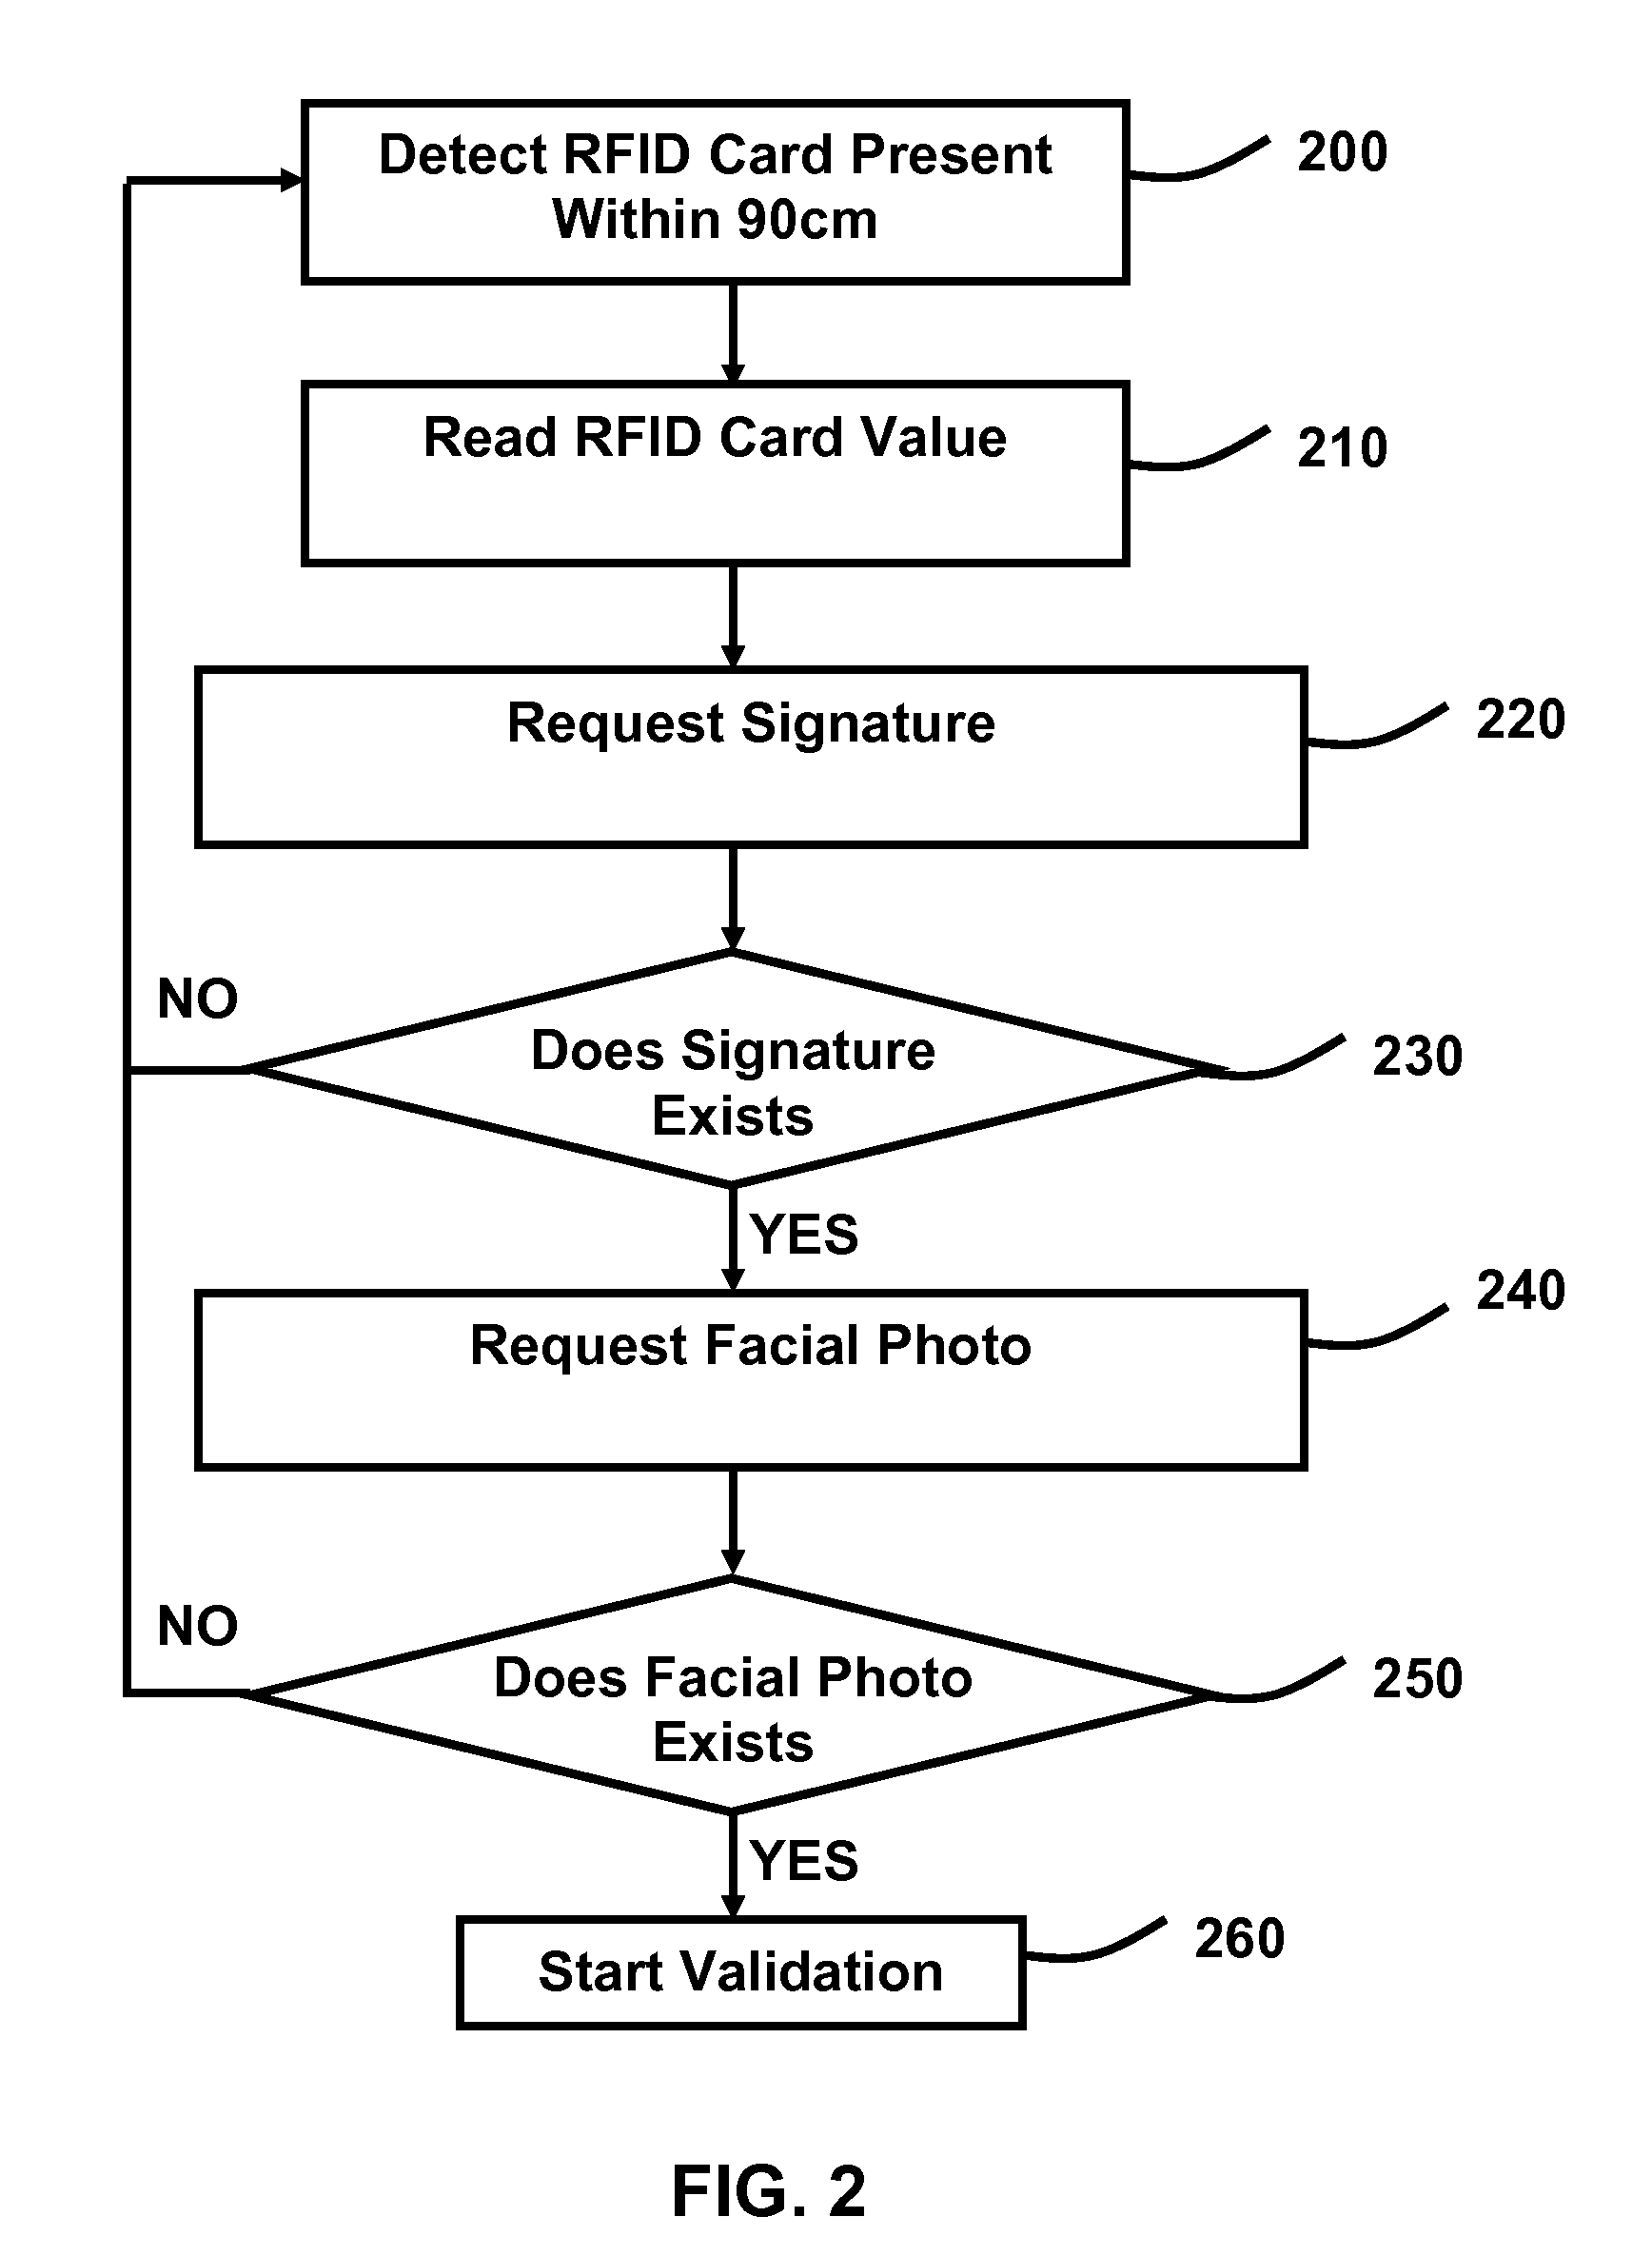 Method for authenticating a person's identity by using a RFID card, biometric signature recognition and facial recognition.